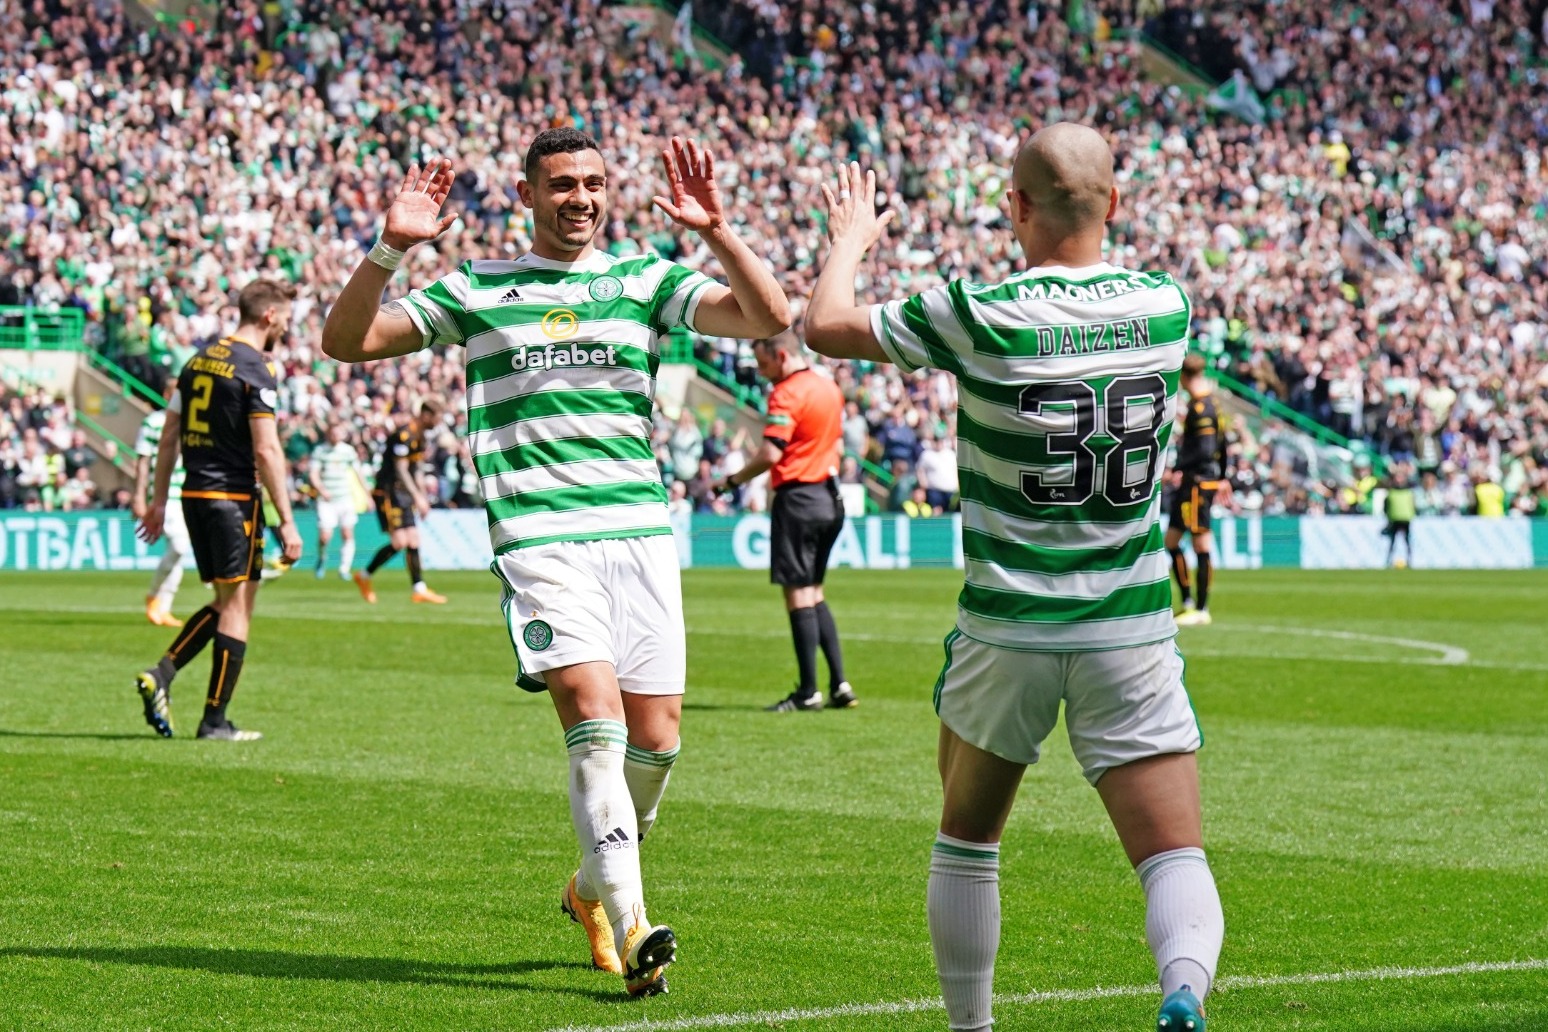 Champions Celtic end season in style by hammering Motherwell 